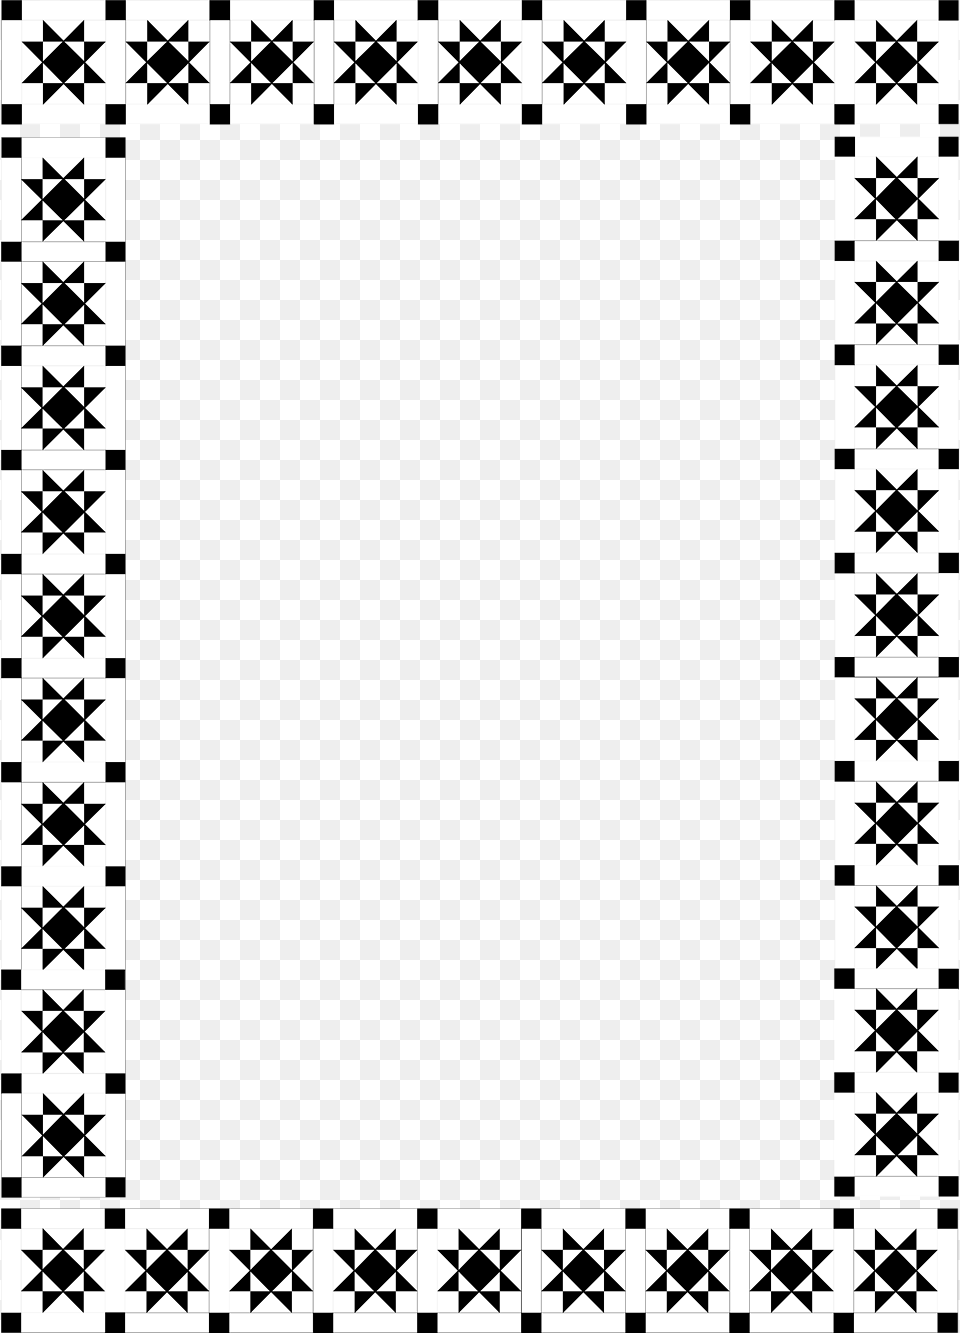 Border Design Black And White, Home Decor, Chess, Game, Pattern Png